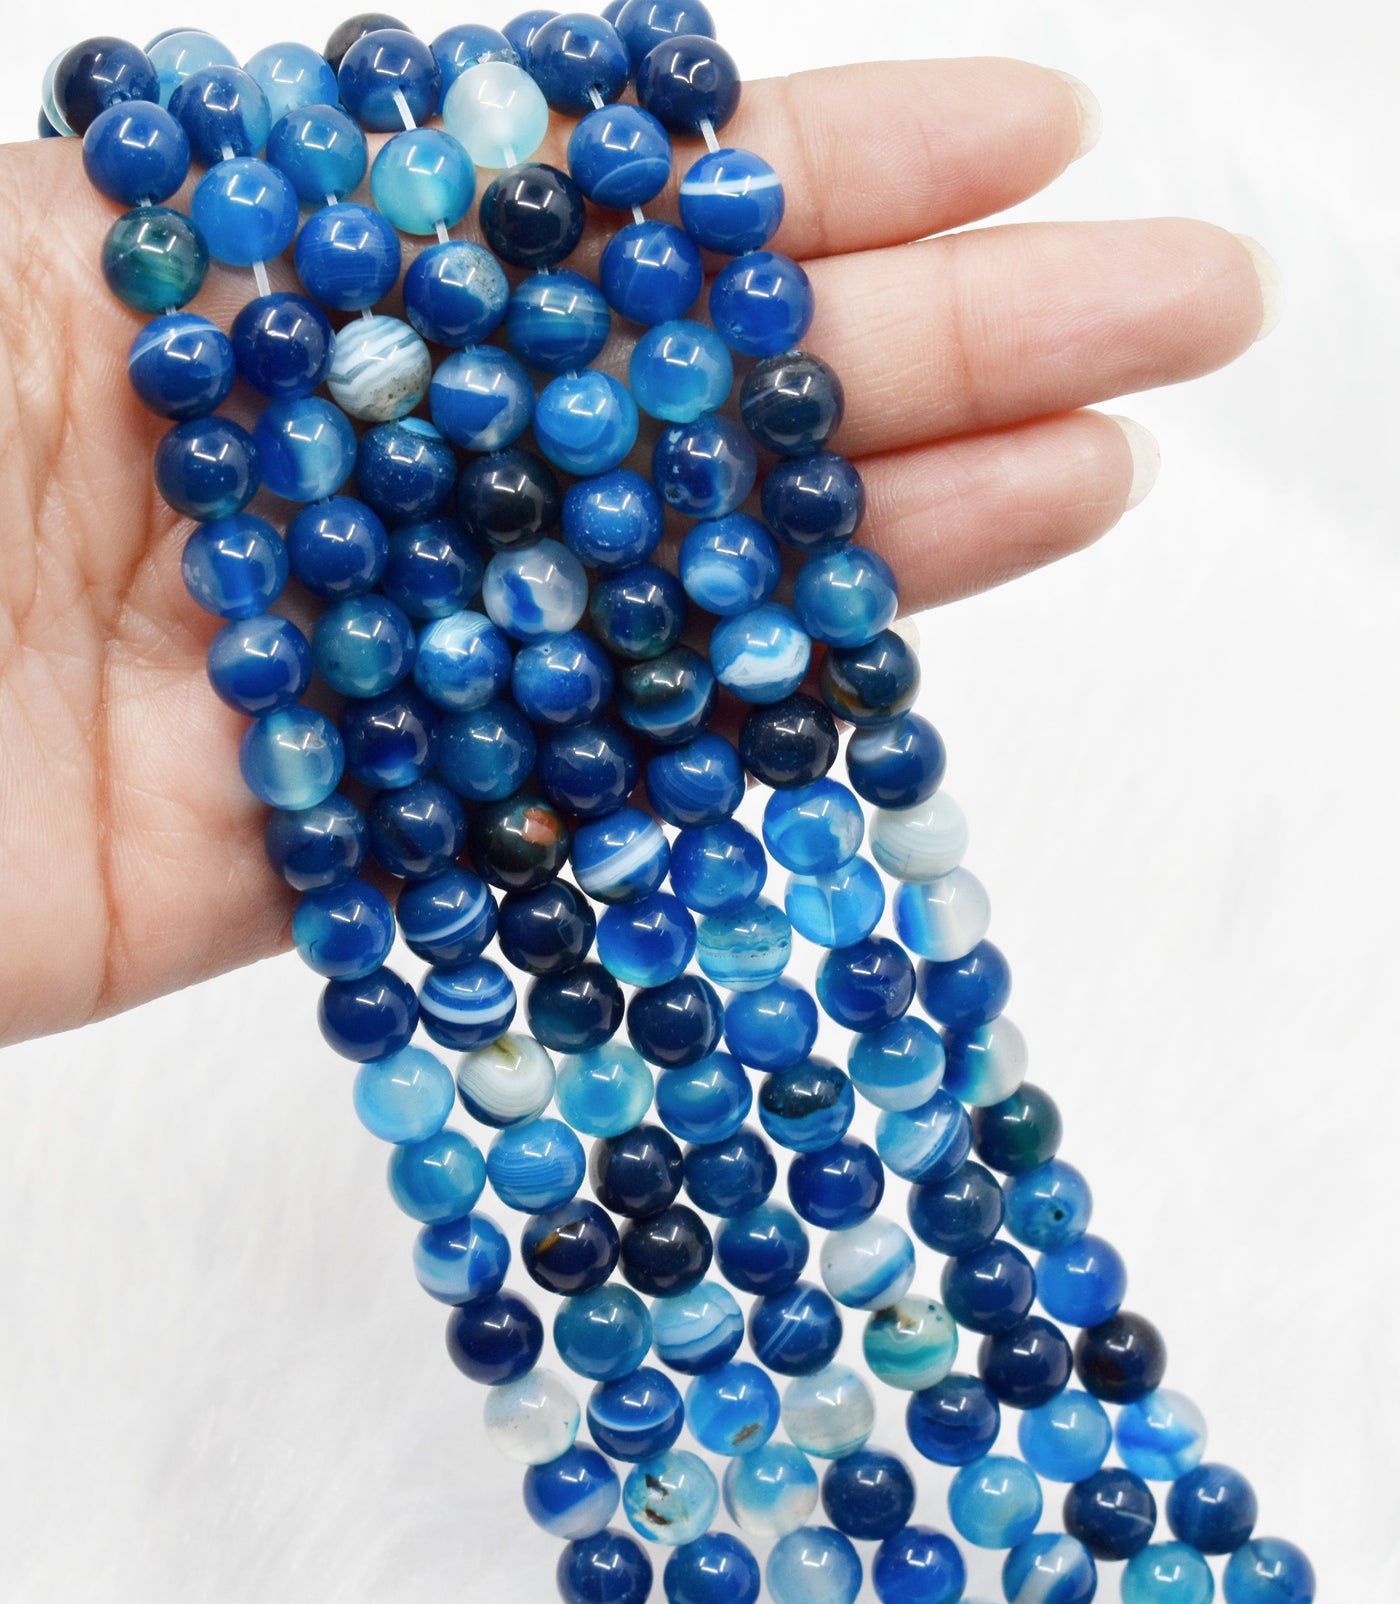 Blue Banded Agate Beads, Natural Crystal Round Beads 6mm to 10mm